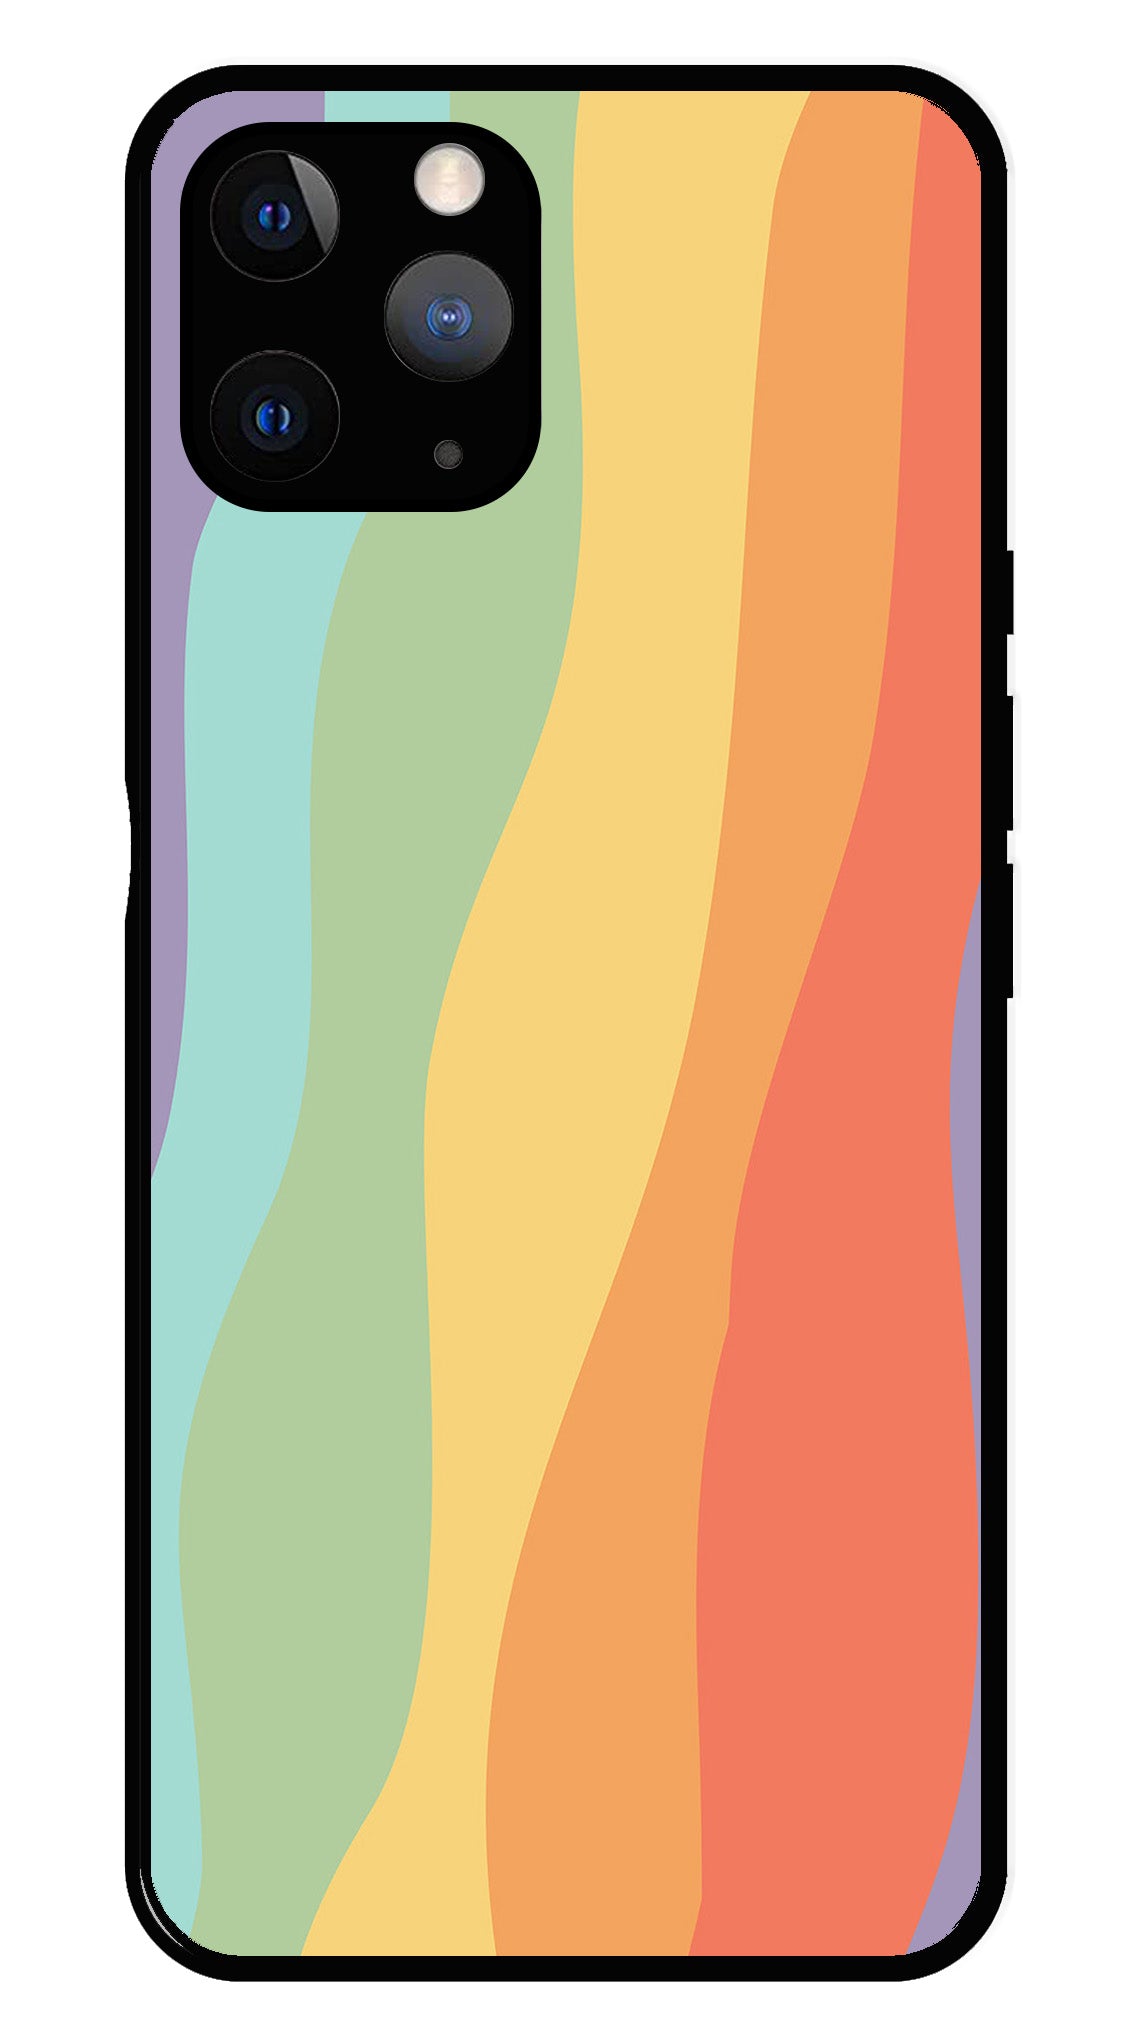 Muted Rainbow Metal Mobile Case for iPhone 11 Pro